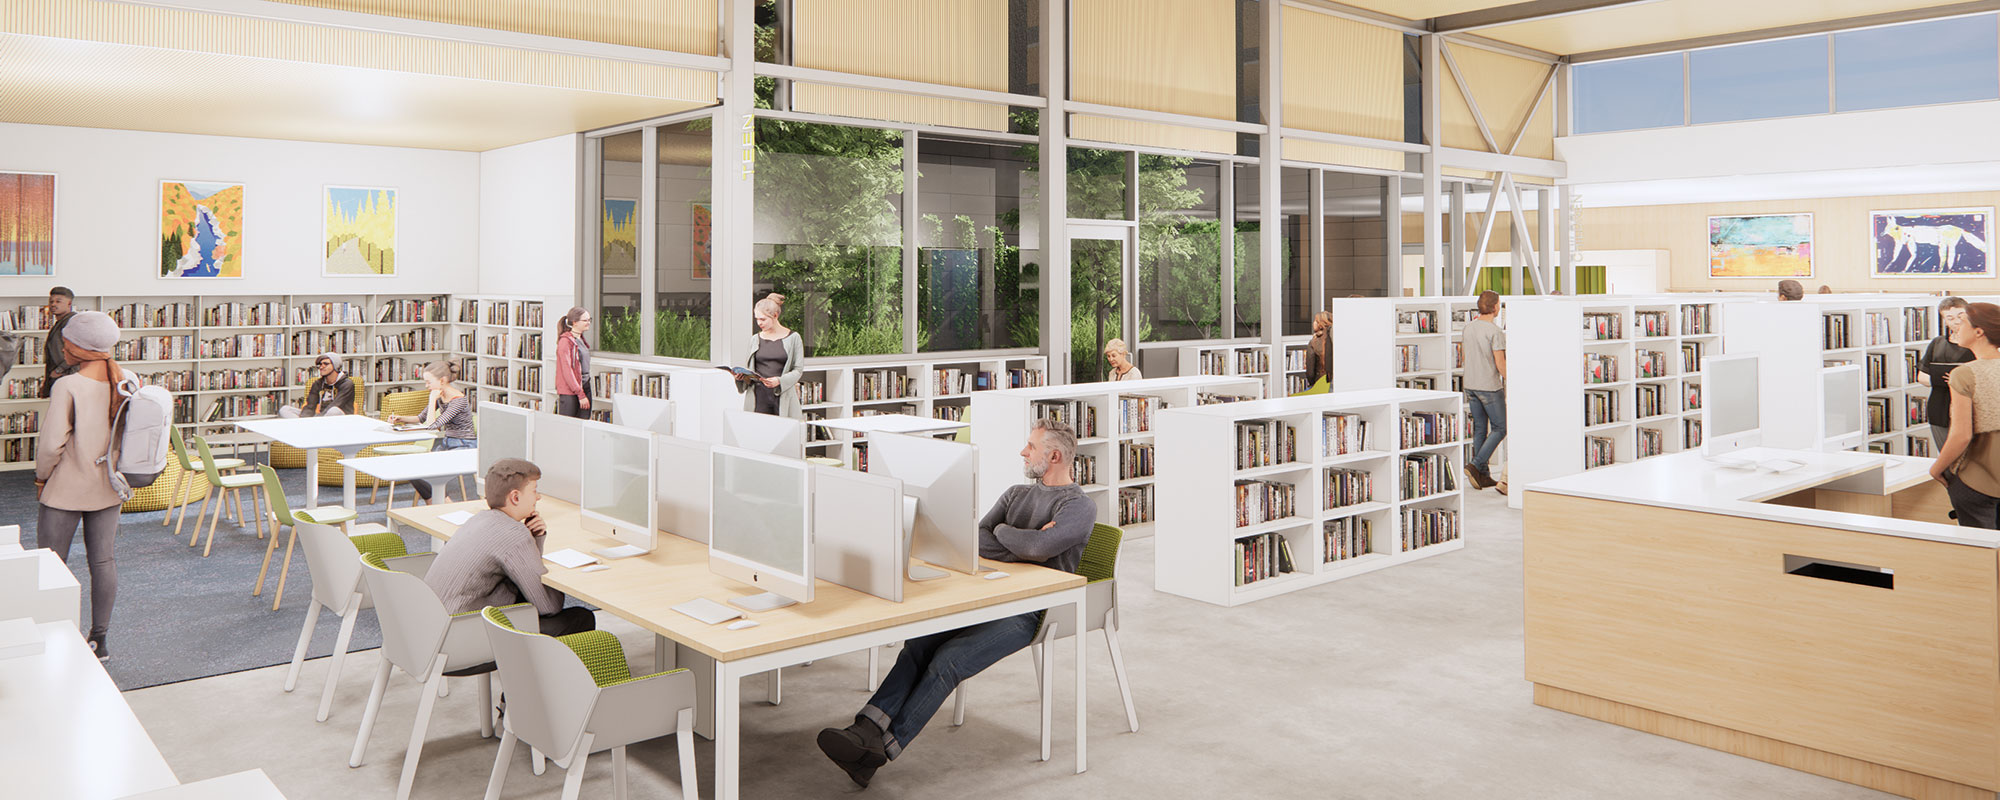 Concept art of the inside of the future Gladstone Library